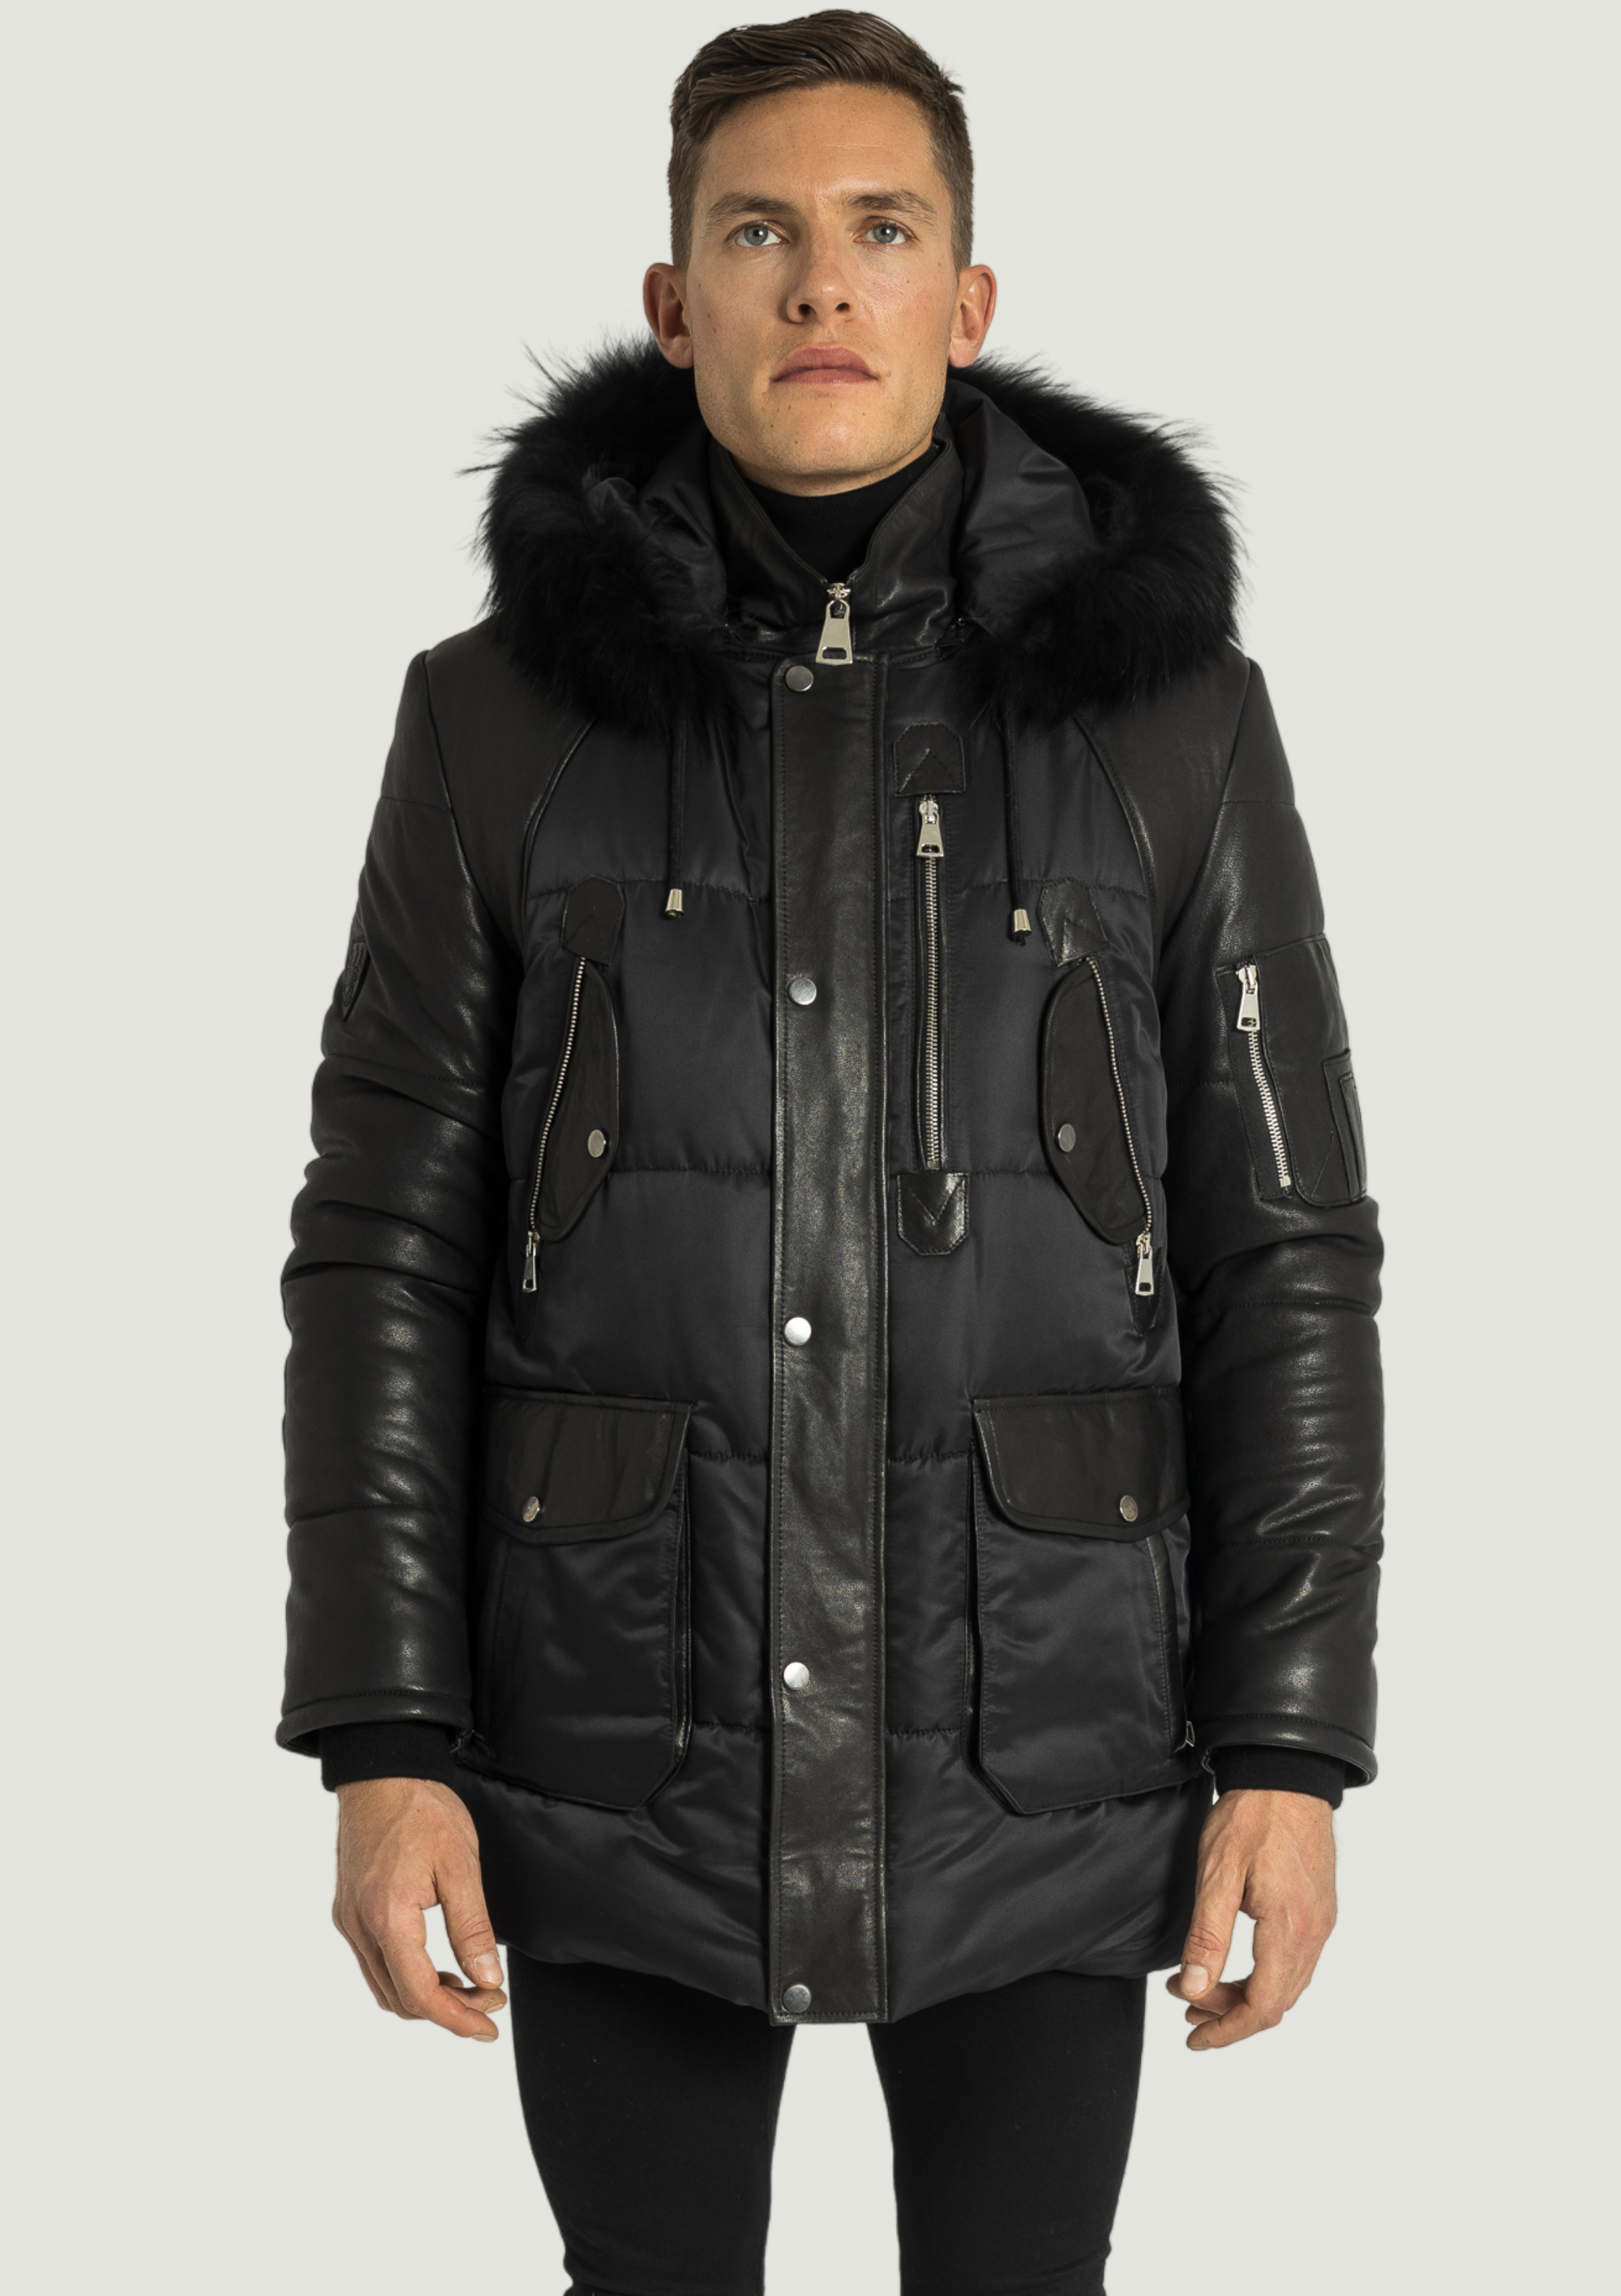 Damian Leather Sleeves Jacket with Black Fur